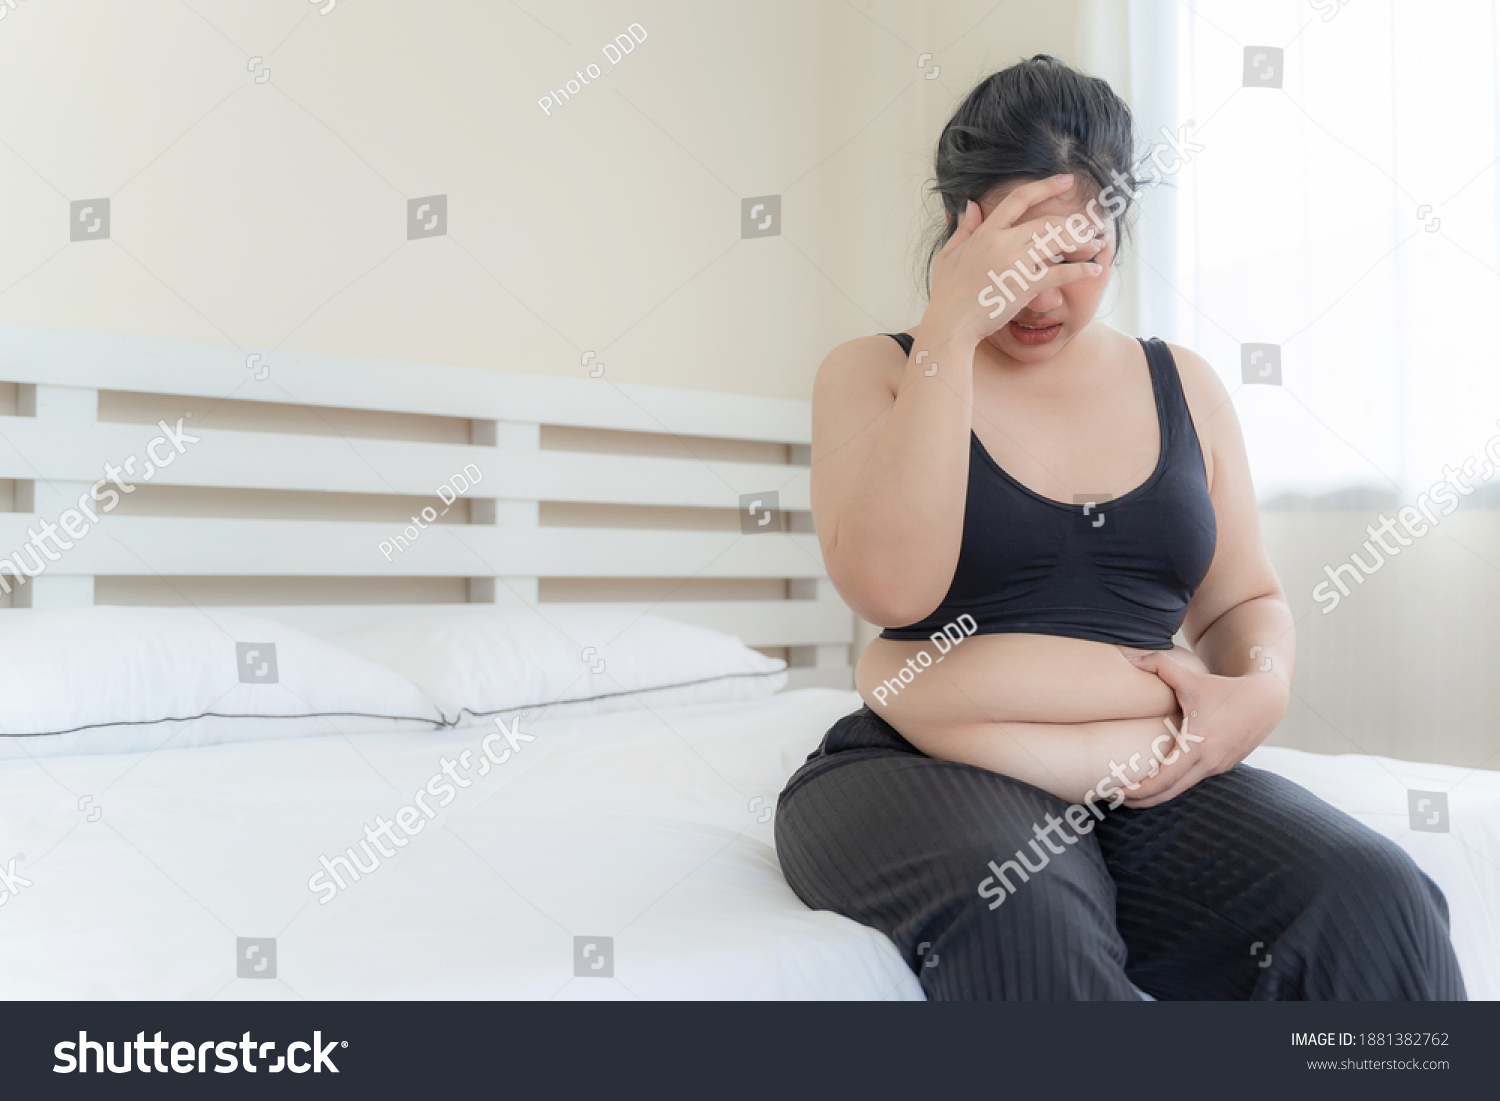 chubby girl on bed